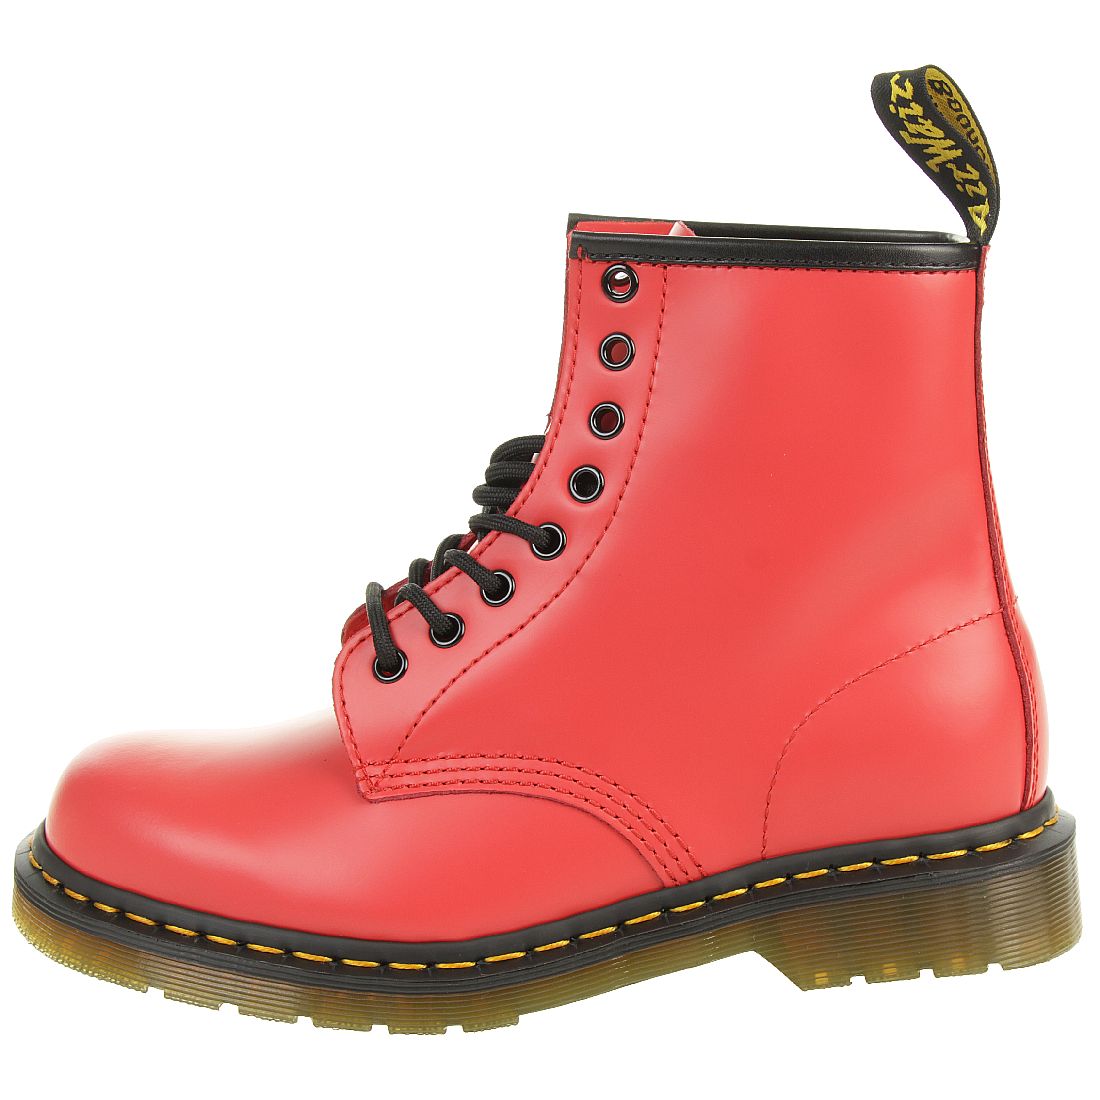 Dr. Martens 1460 Smooth Red Damen Stiefel Boots rot 24614636